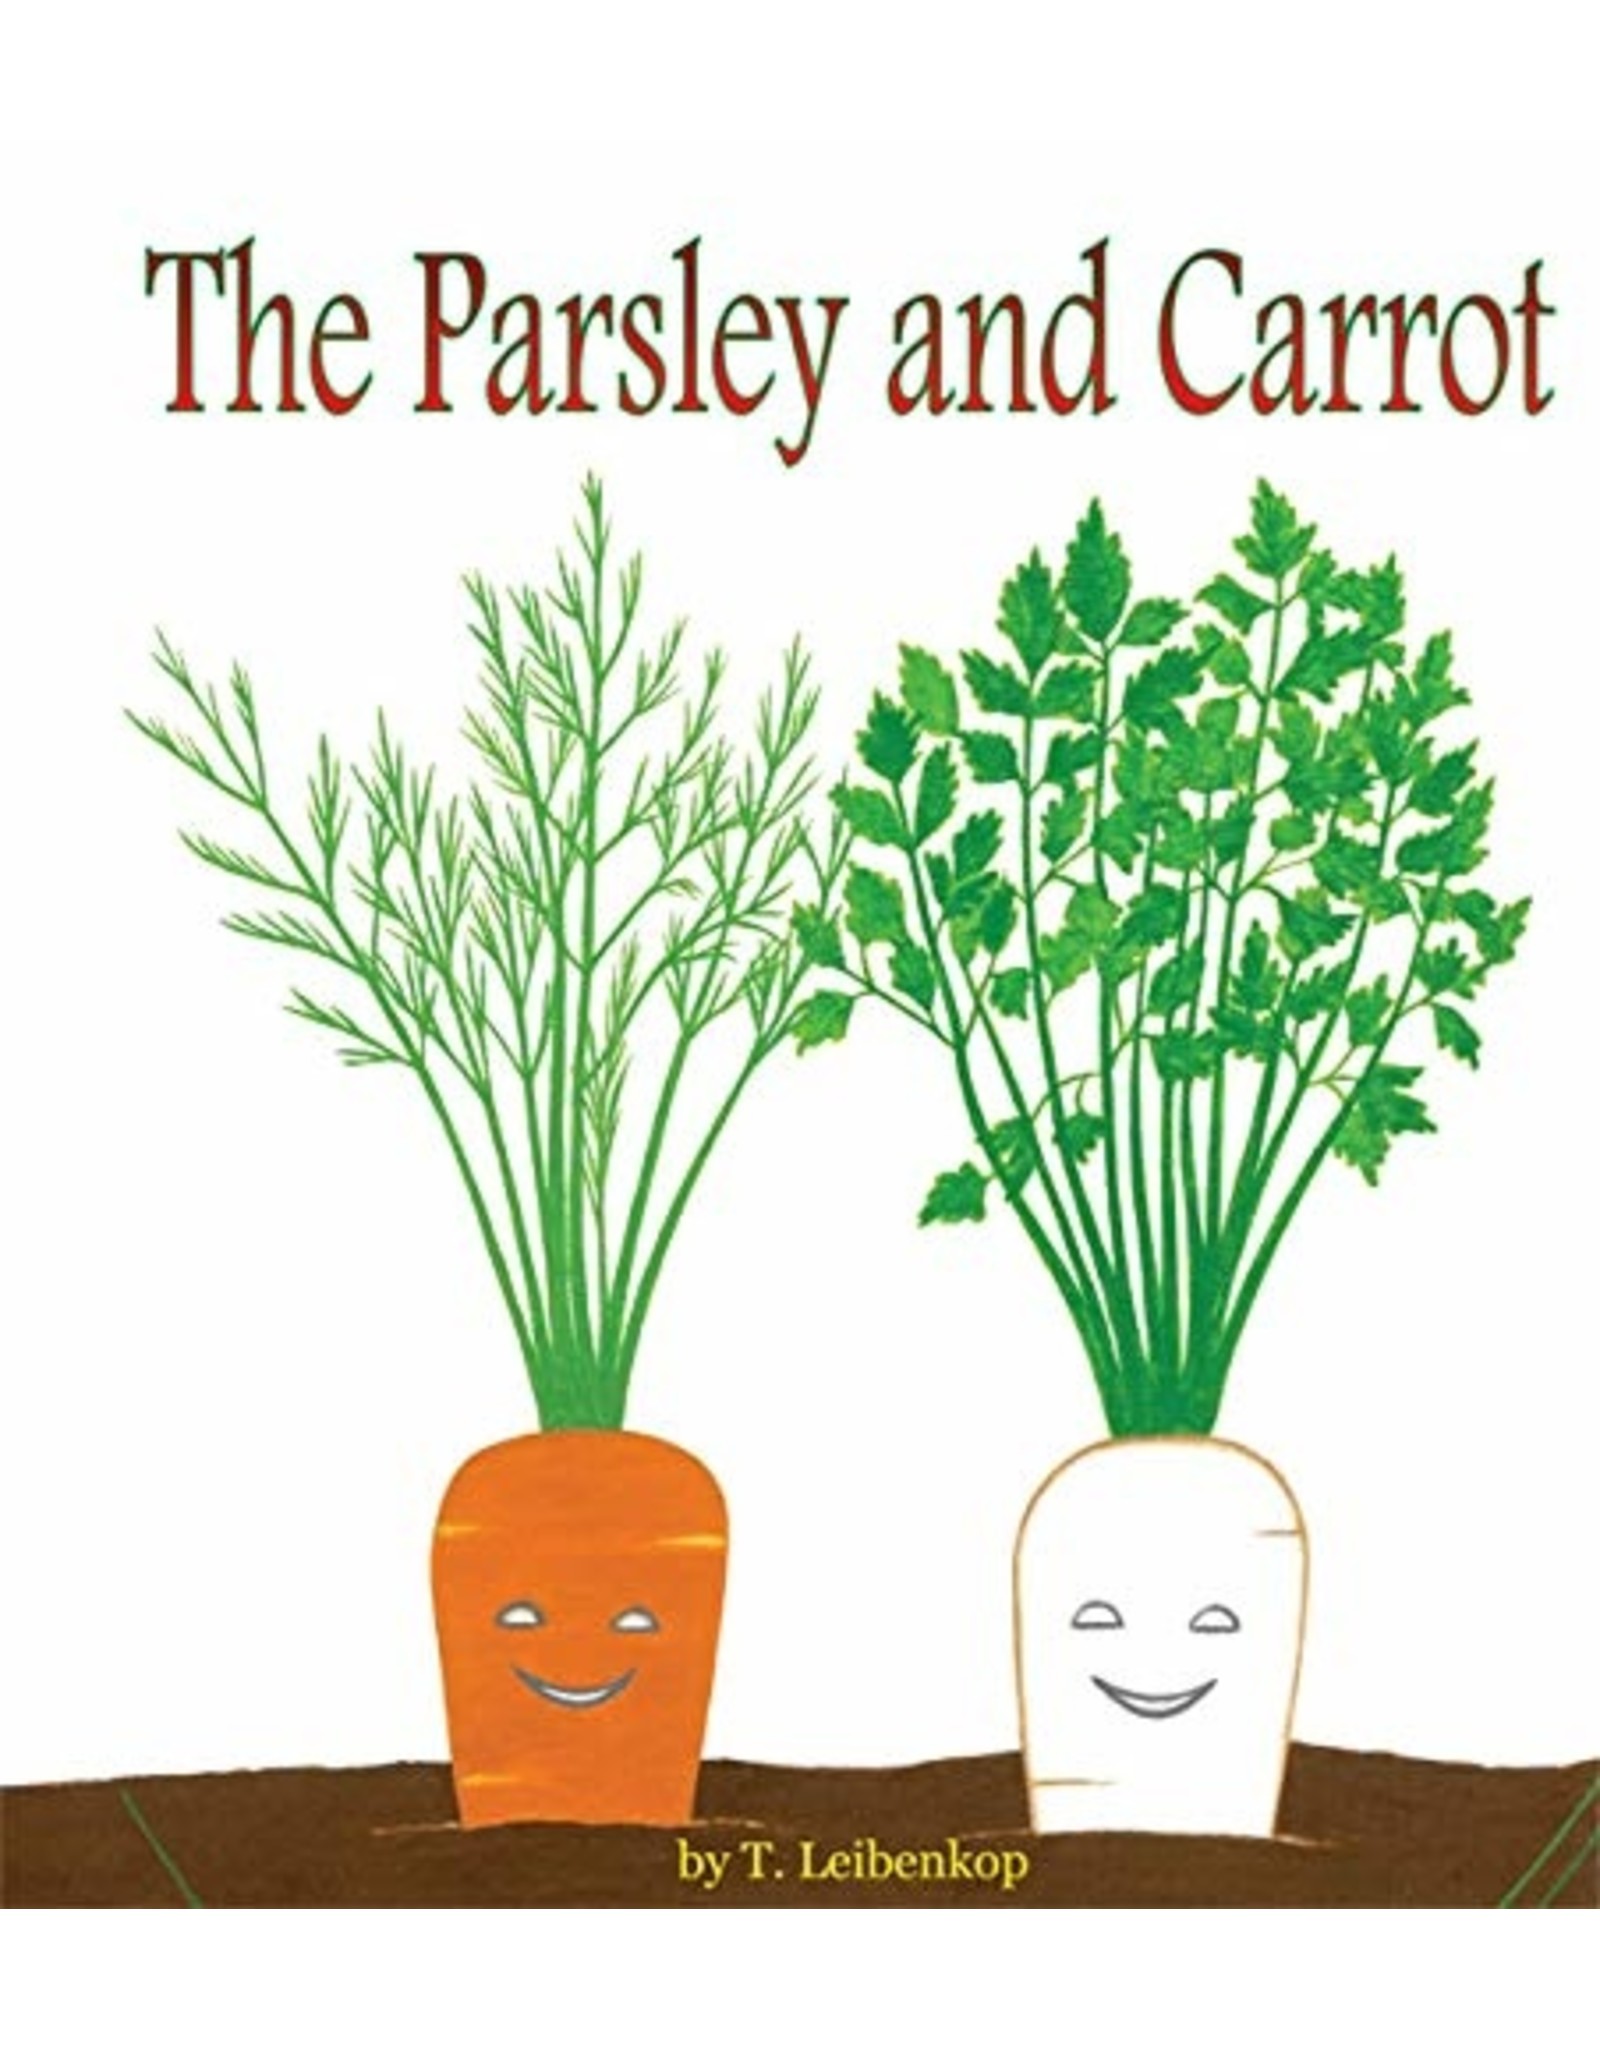 Literature The Parsley and Carrot